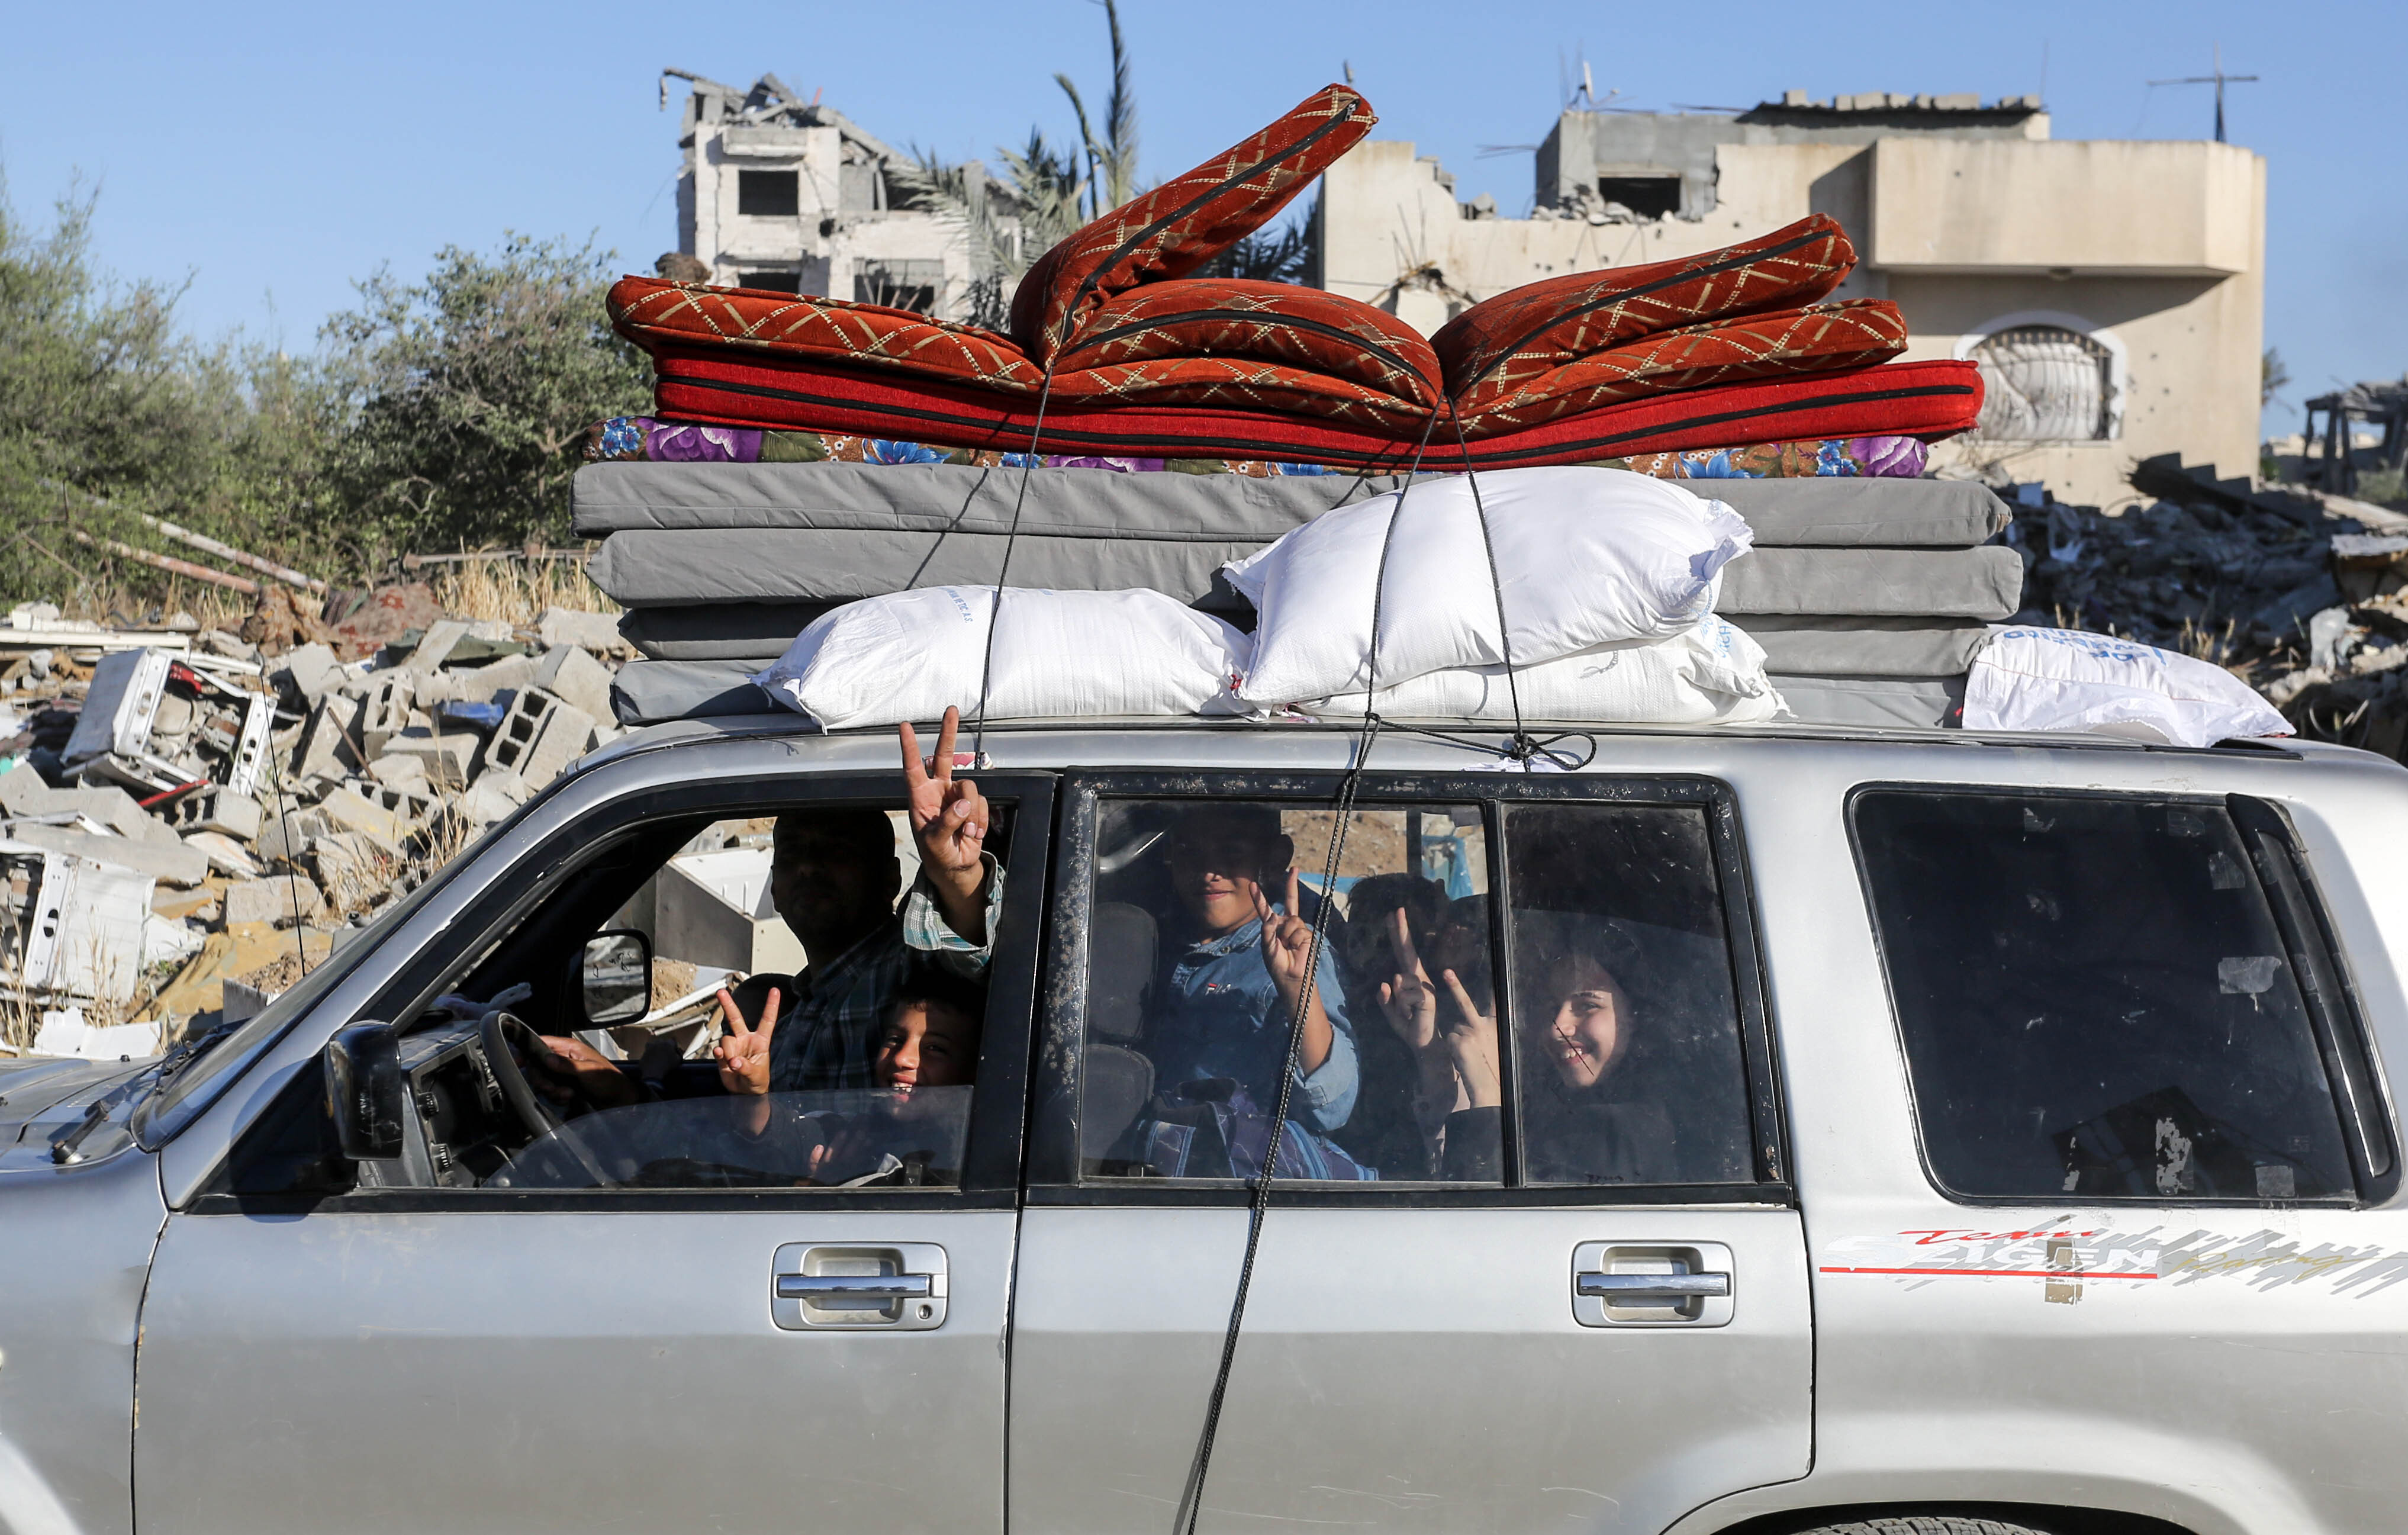 Palestinians in a packed car with mattresses stacked on top.